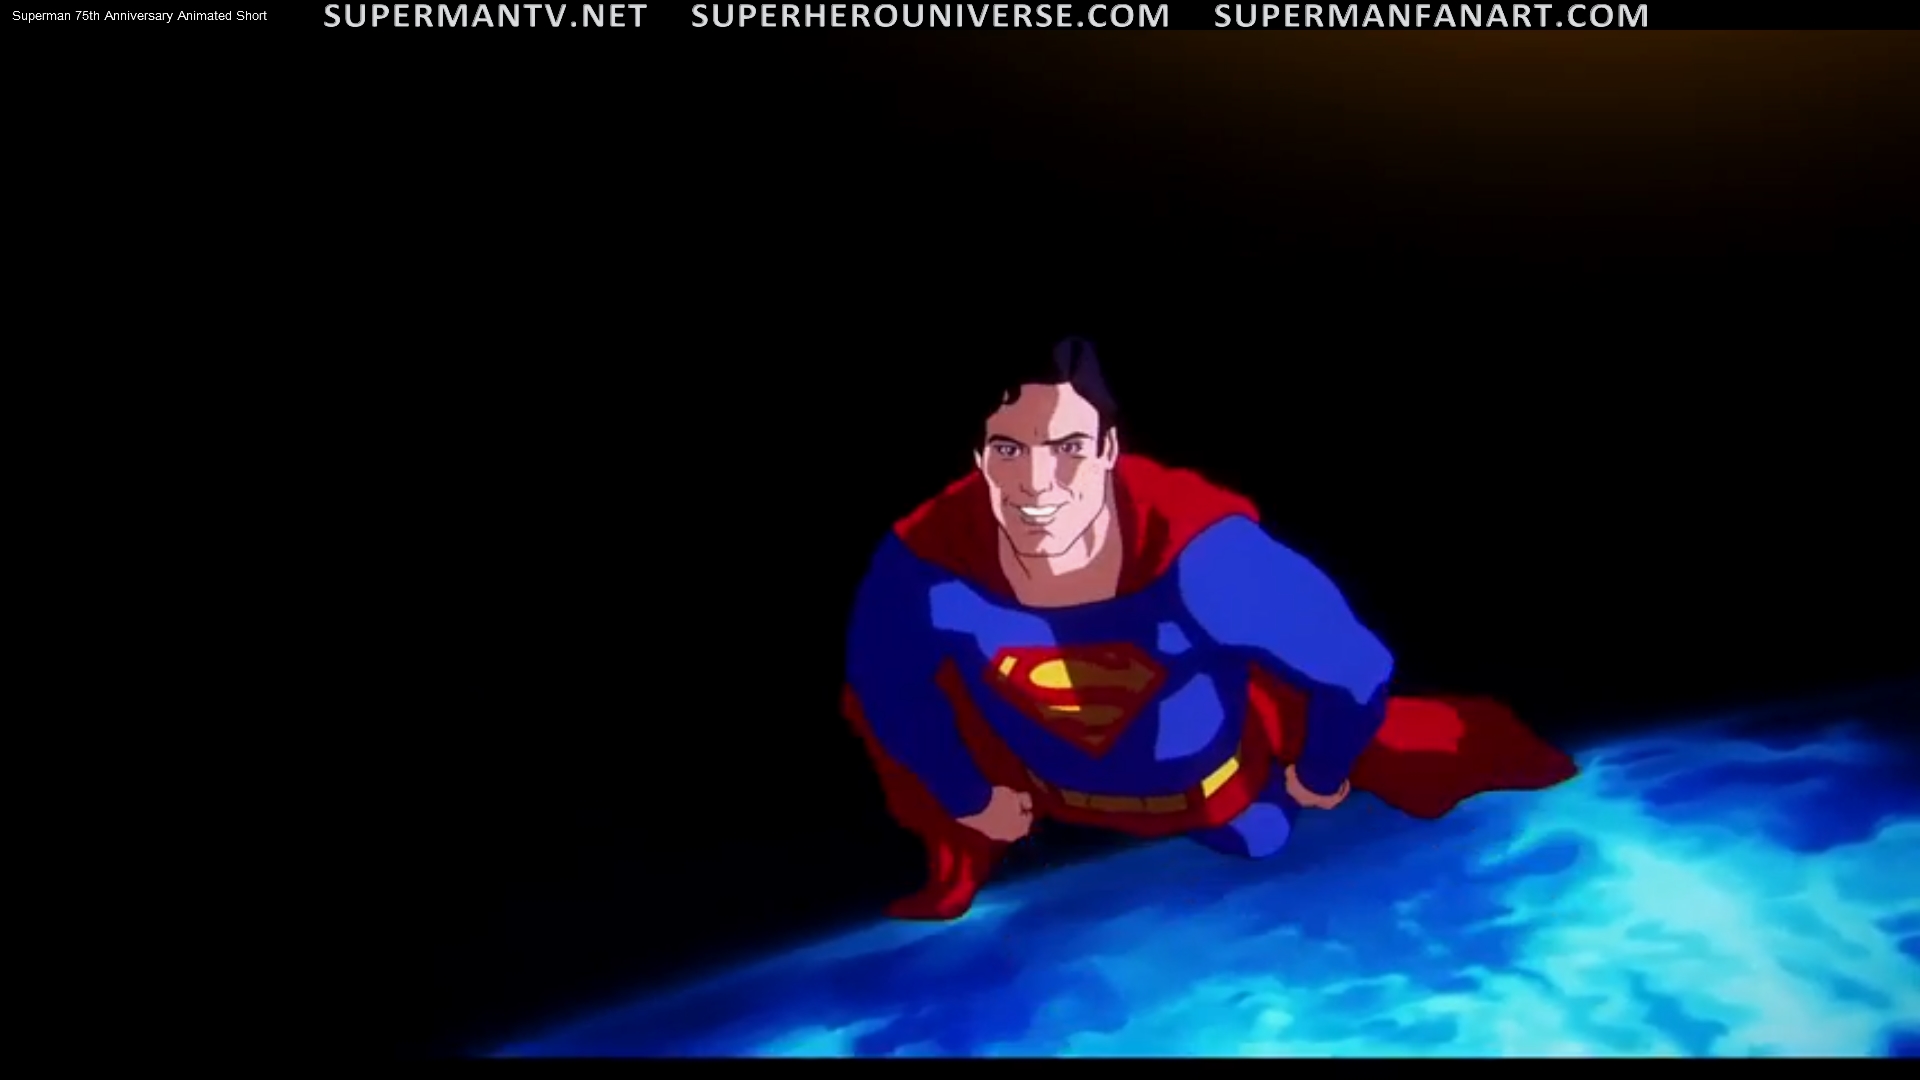 Christopher Reeve 75th Superman Anniversary Image Gallery